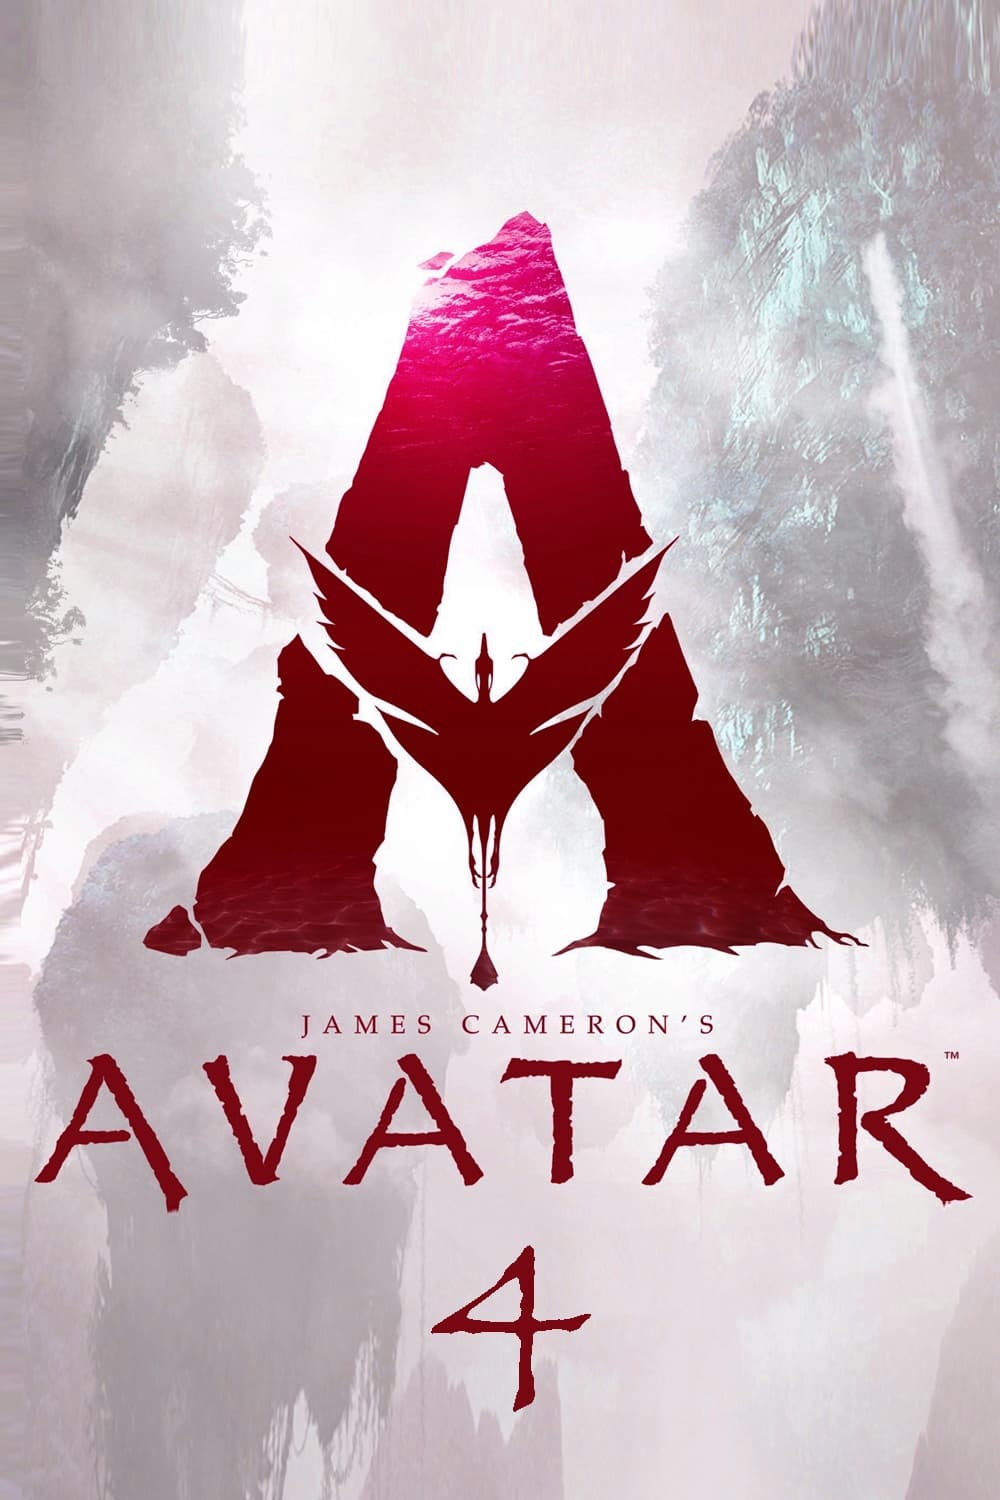  Avatar 4 Movie 2023, Official Trailer, Release Date, HD Poster 